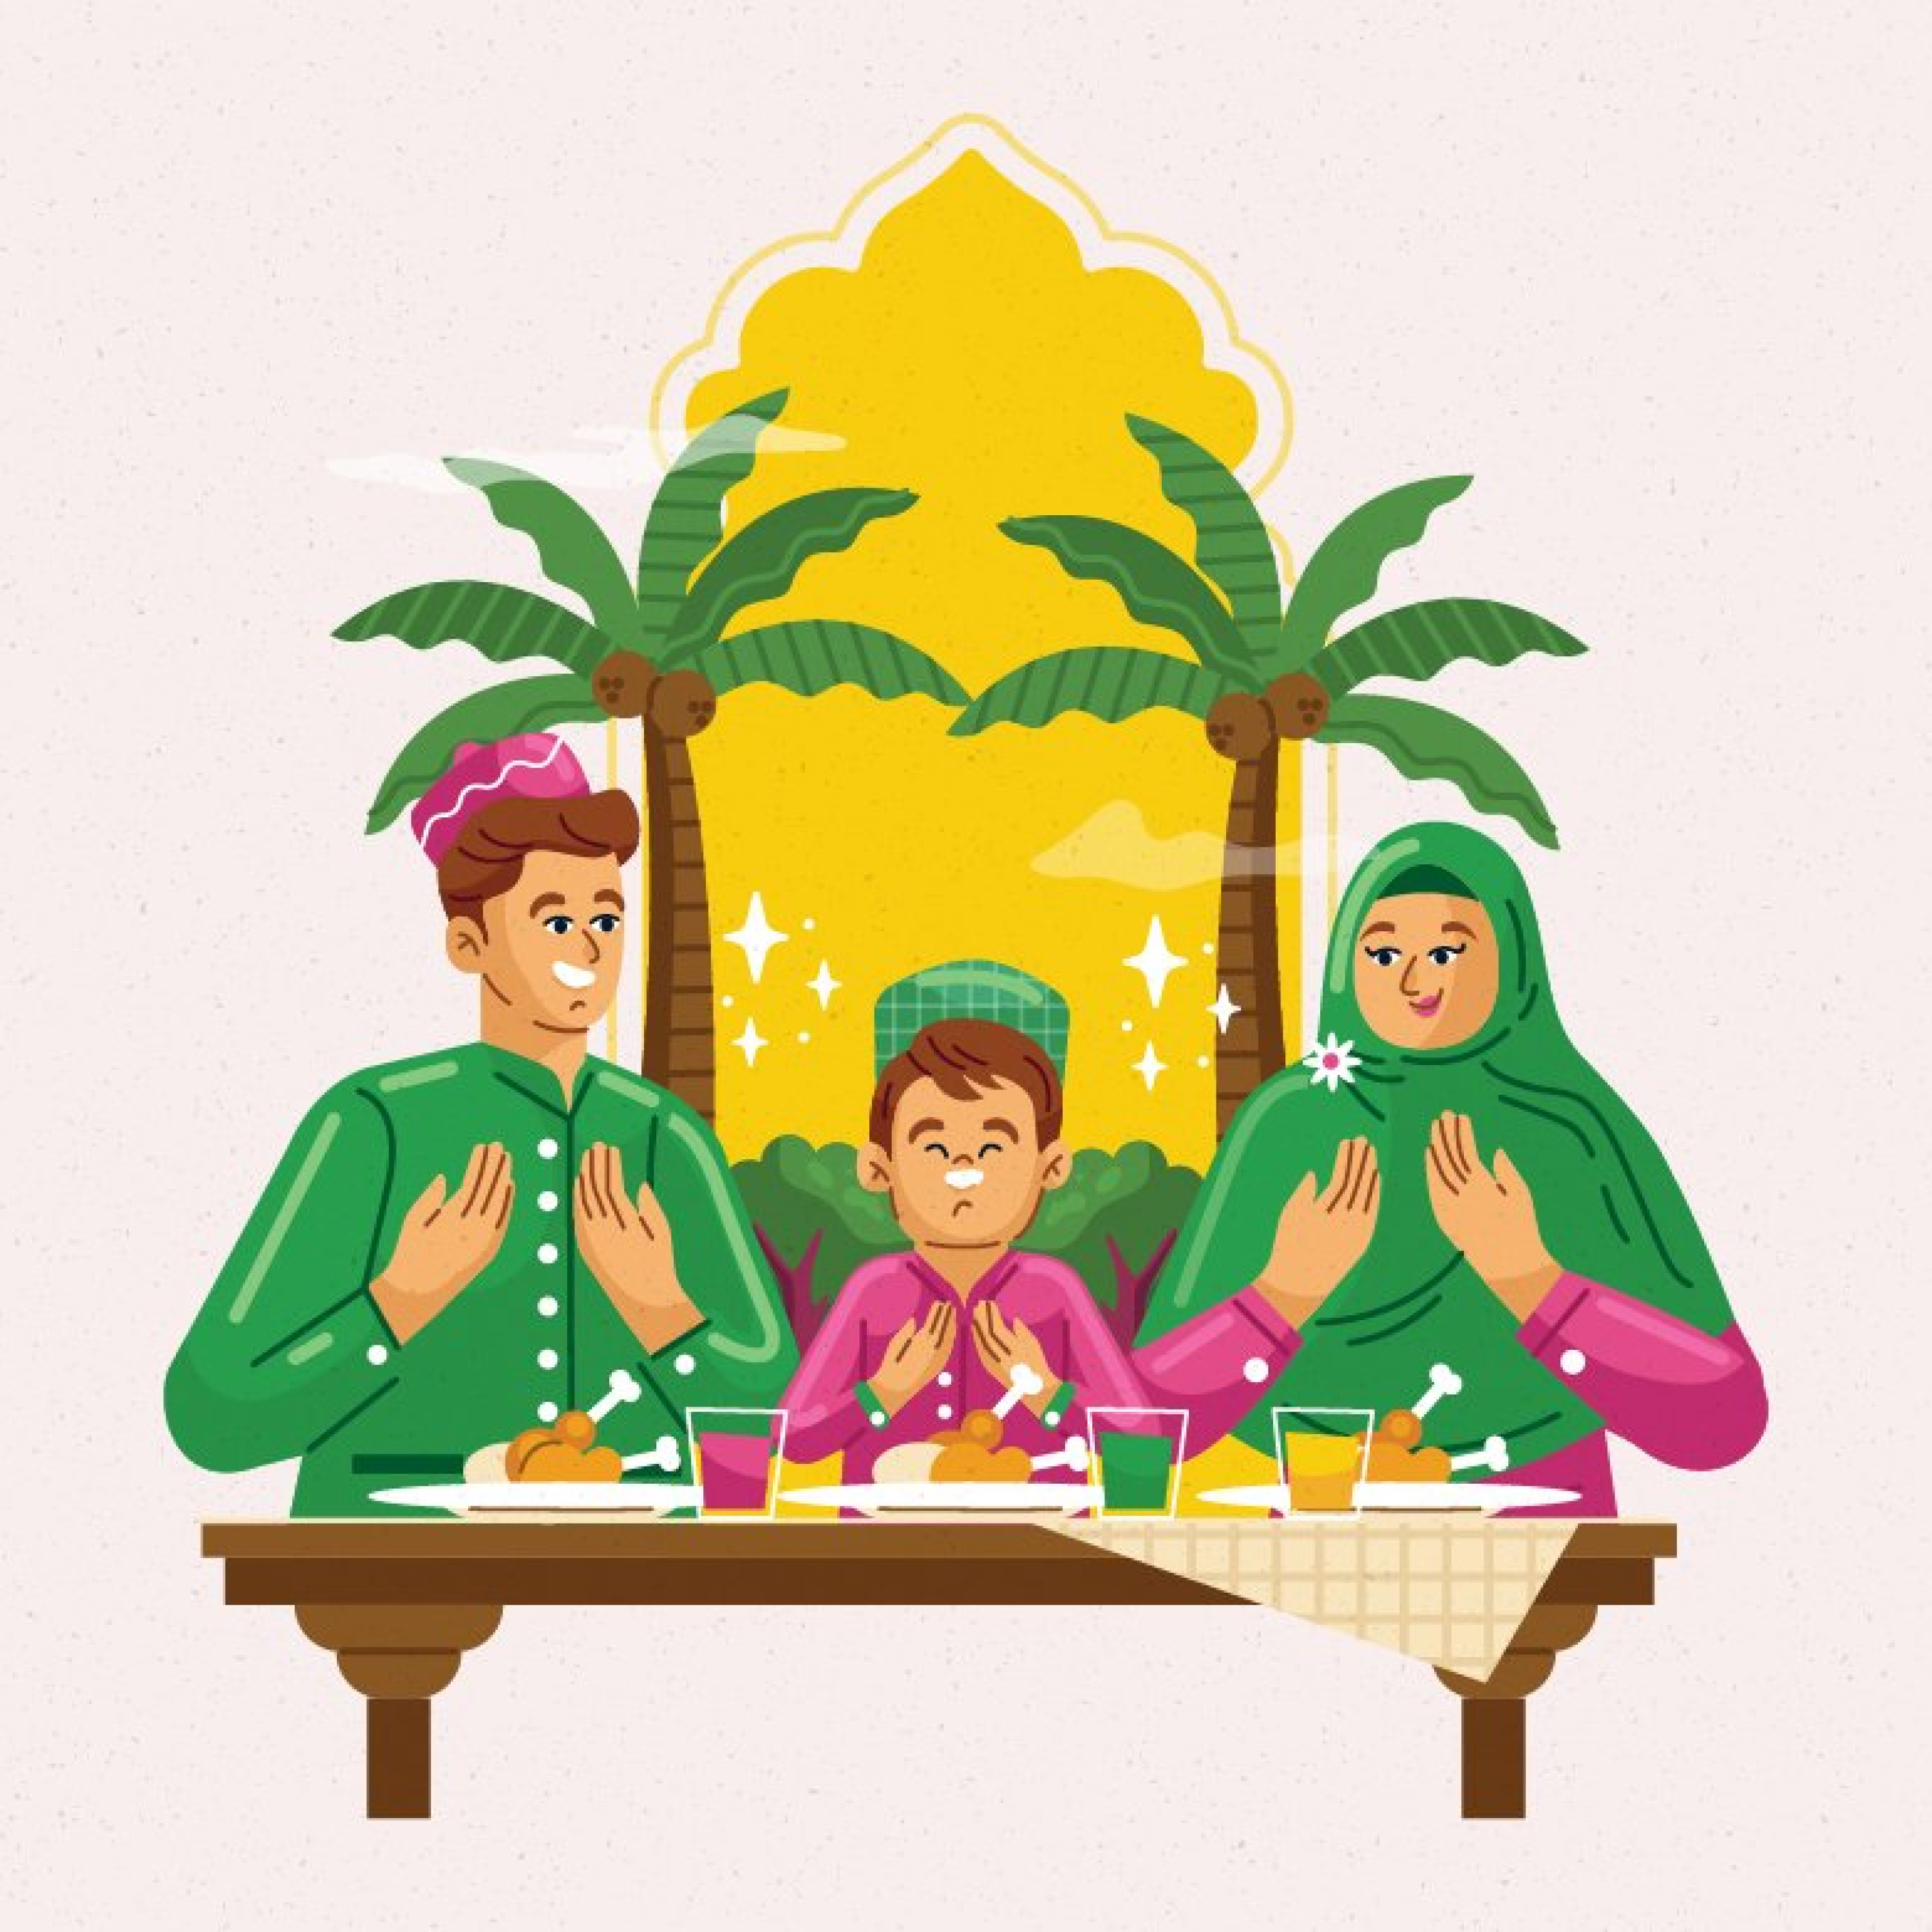 Preview iftar with family illustration.